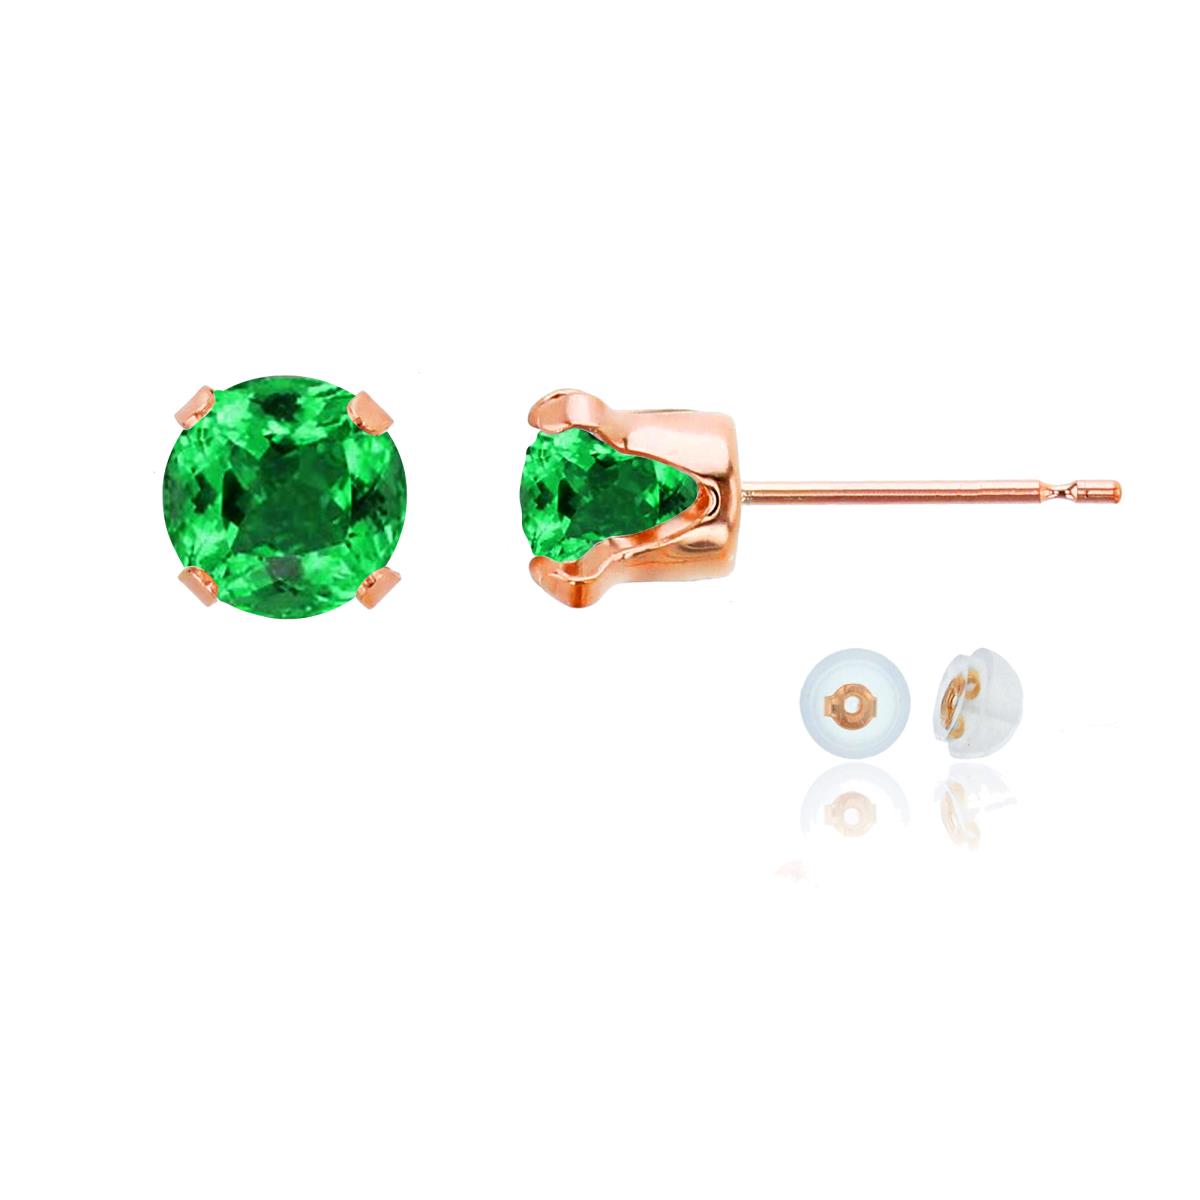 10K Rose Gold 6mm Round Cr Emerald Stud Earring with Silicone Back